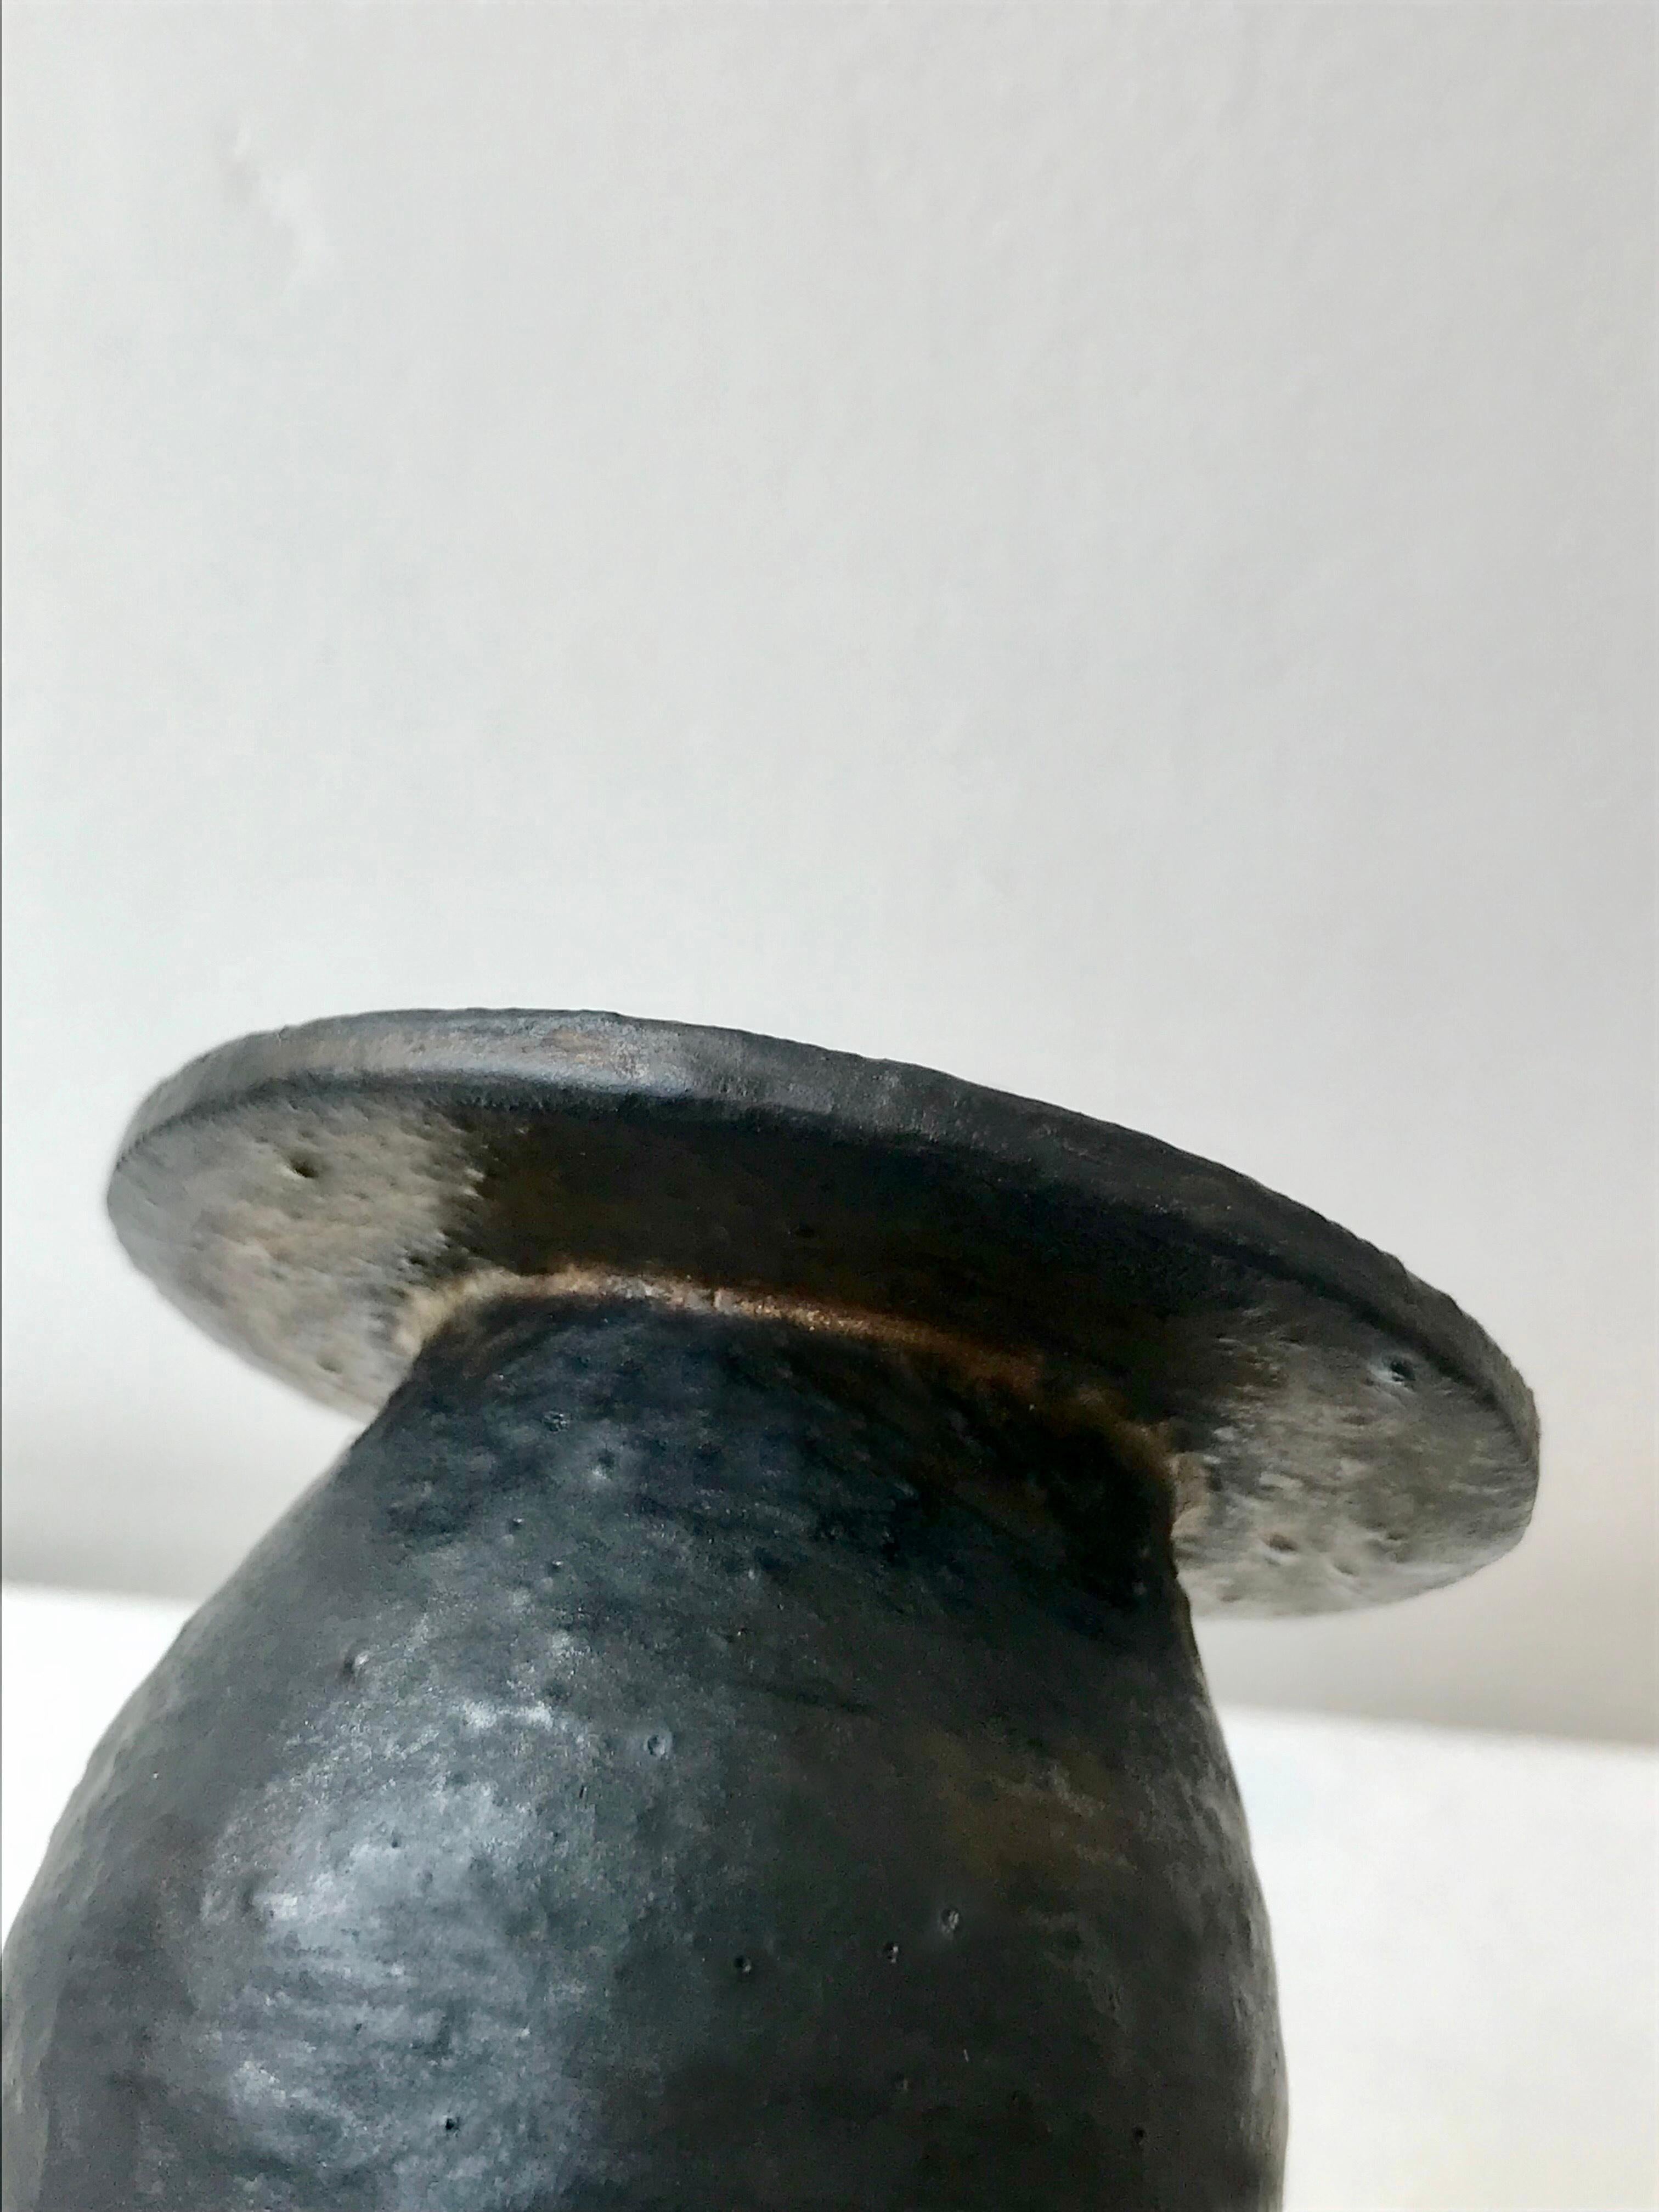 Hans Coper, small pot.
-Stoneware, black glaze
-Circa 1958
-Impressed with artist's seal

Literature:
Tony Birks, Hans Coper, Yeovil, 2013, p. 99 for a similar example

Hans Coper learned his craft in the London studio of Lucie Rie, having